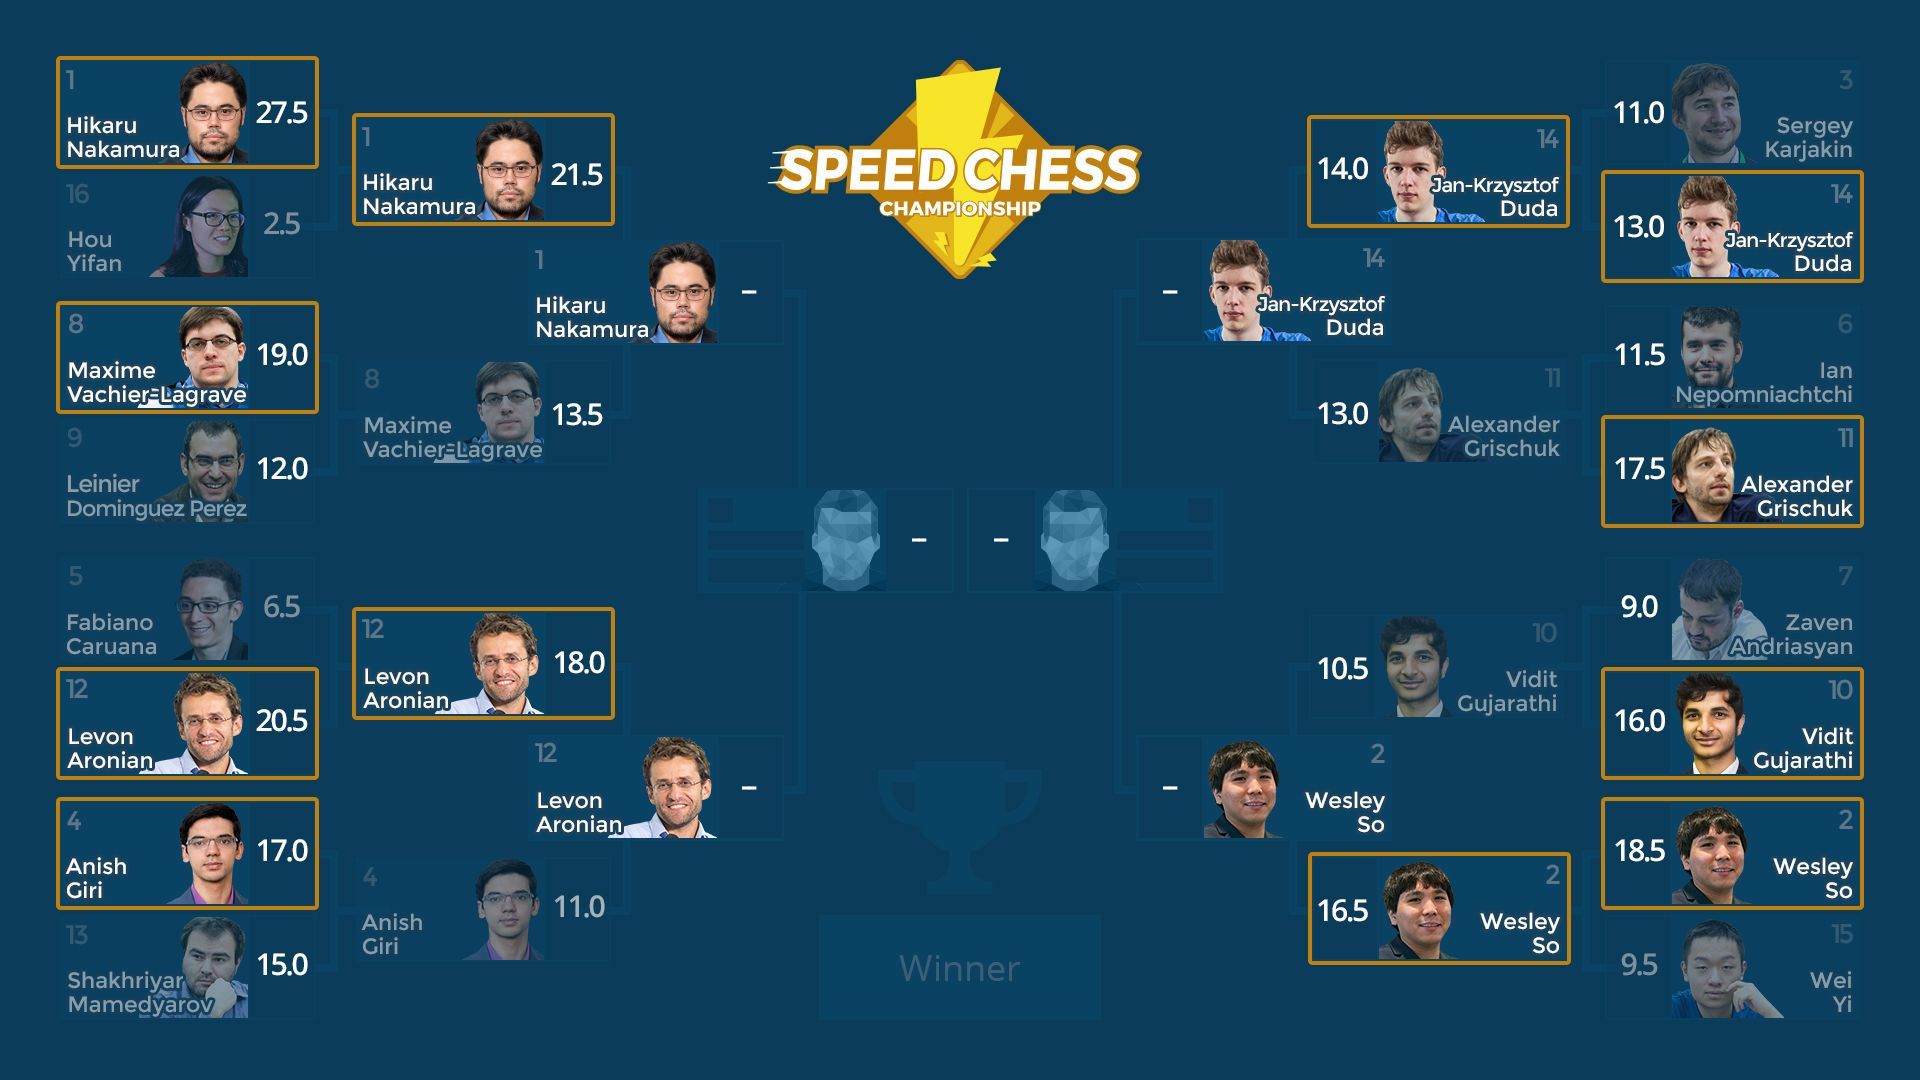 How To Watch The Speed Chess Championship Final 4 This Weekend